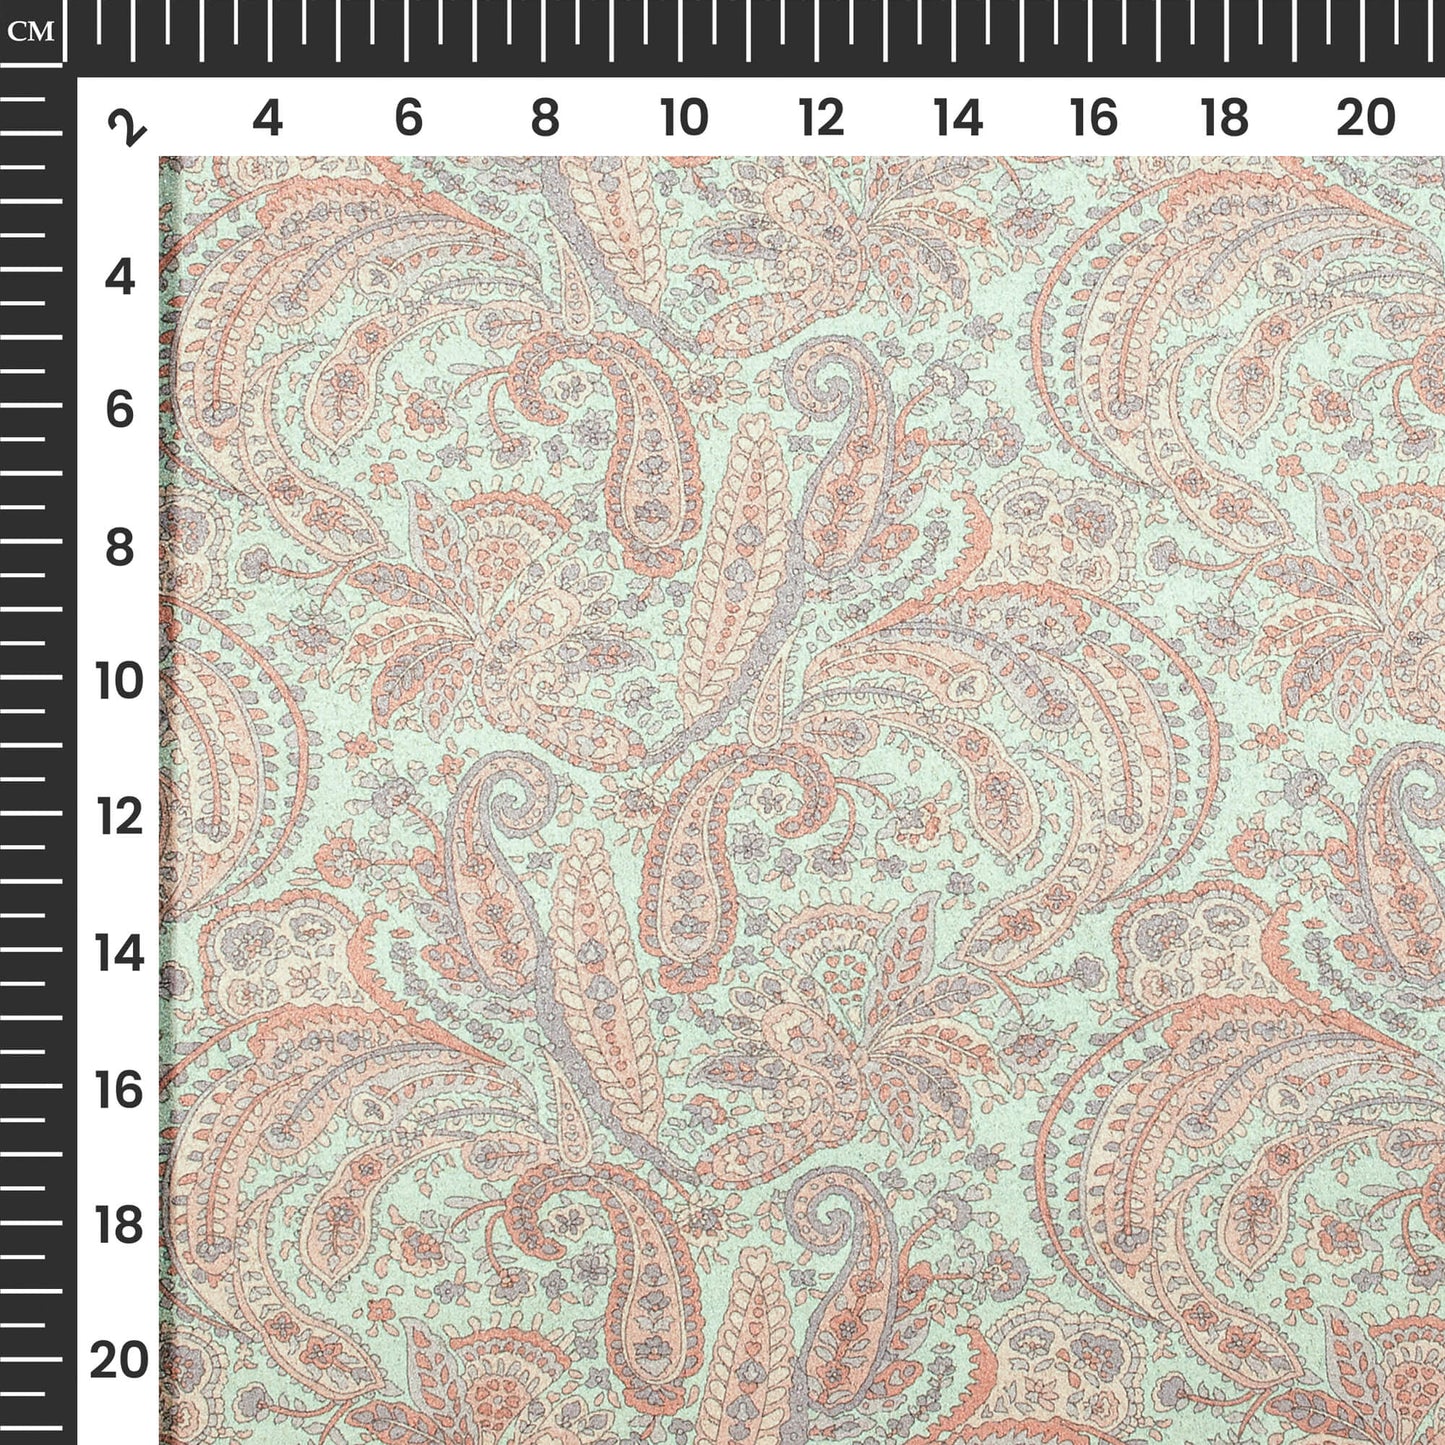 Floral Paisley Printed Deluxe Suede Fabric